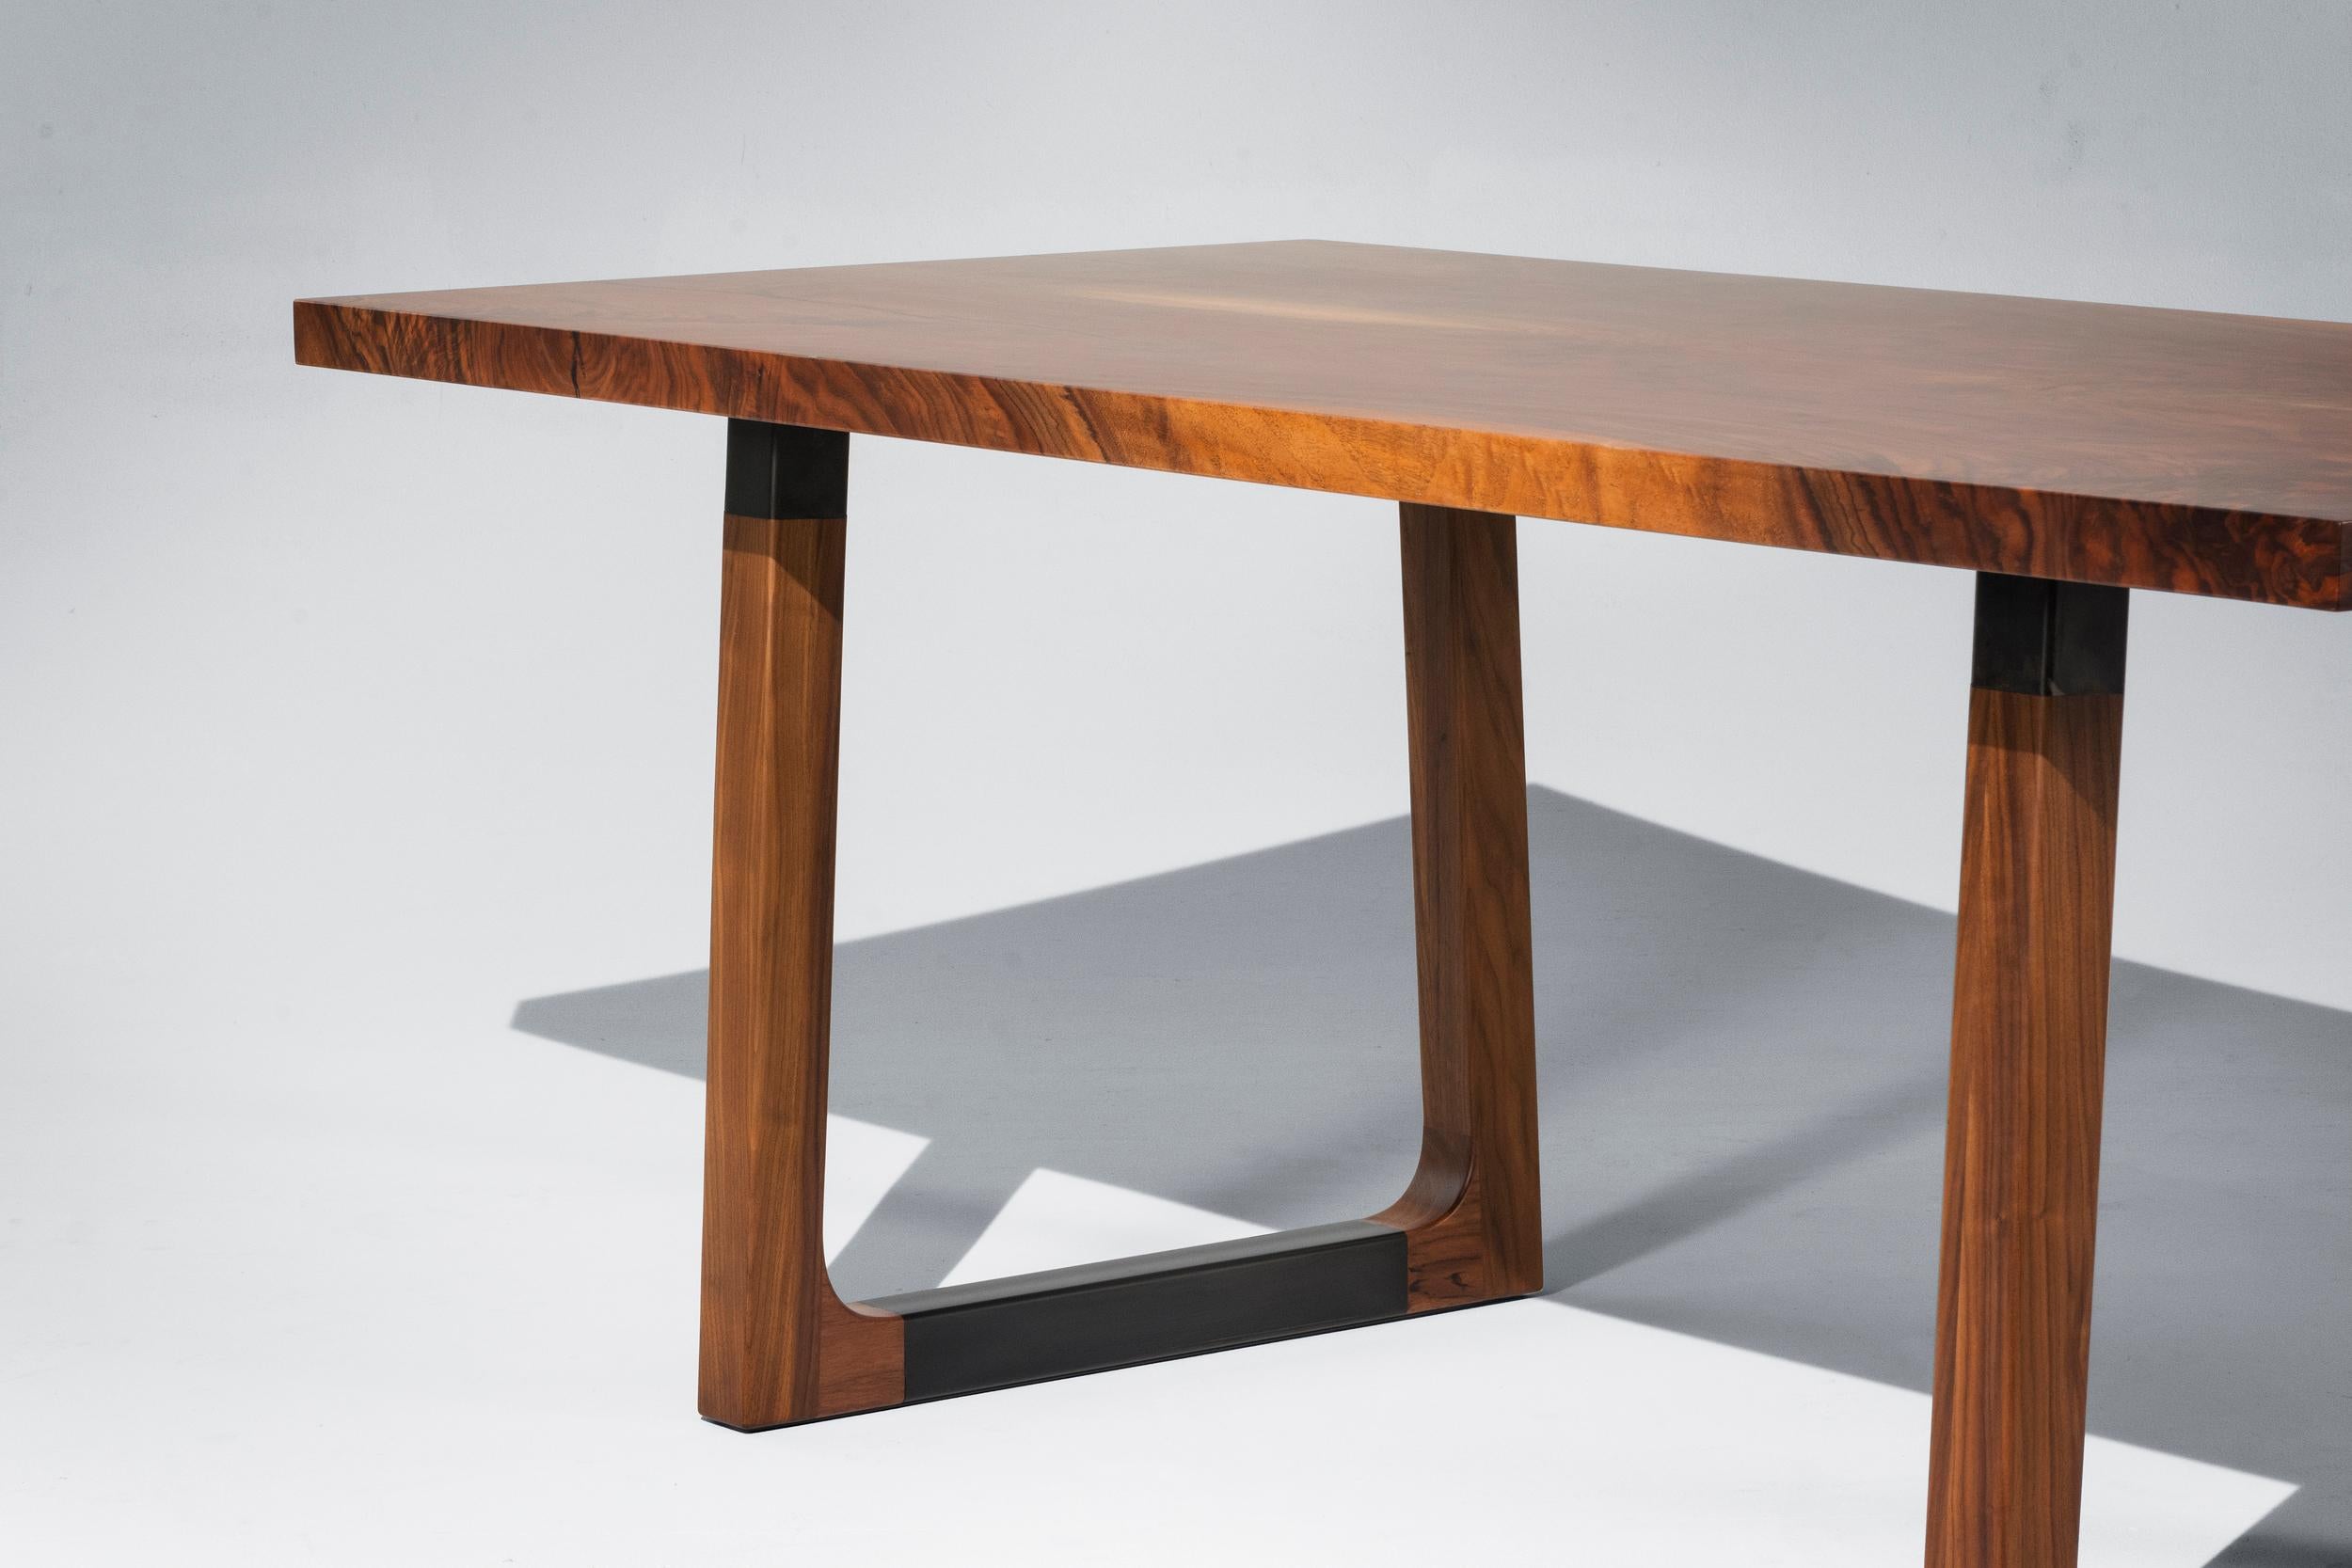 The Campau dining table is made of a bookmatched solid walnut top and solid walnut bases with blackened steel inserts. This simple and modern table emphasizes the high-quality materials and craftsmanship that went into producing this piece. 

This